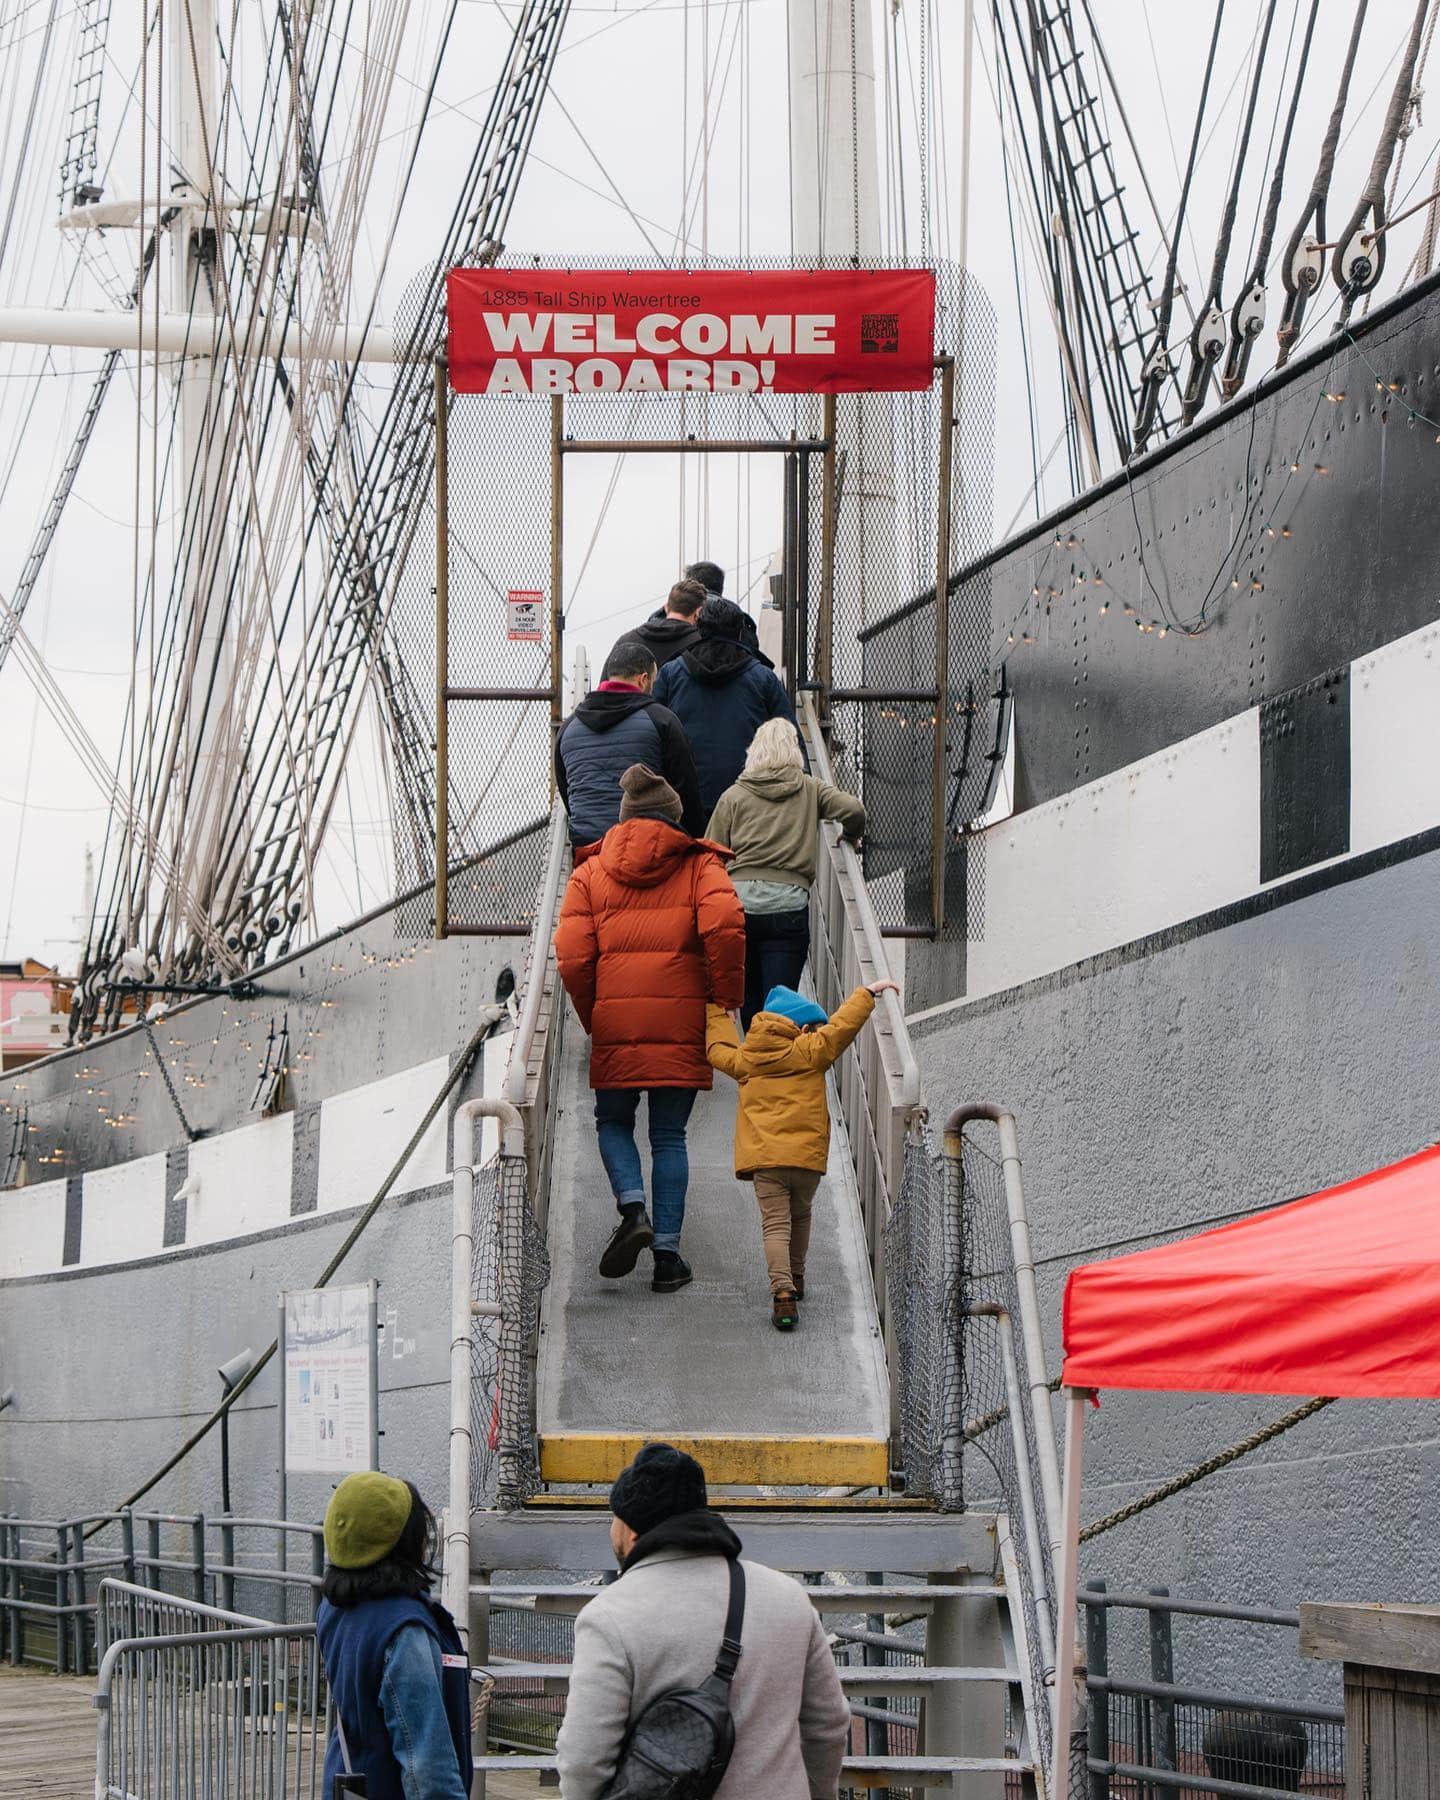 Historical ships. Exhibitions. Creative expression. Family fun for everyone. Experience it all at the @seaportmuseum. 

Monthly events ➤ link in bio.